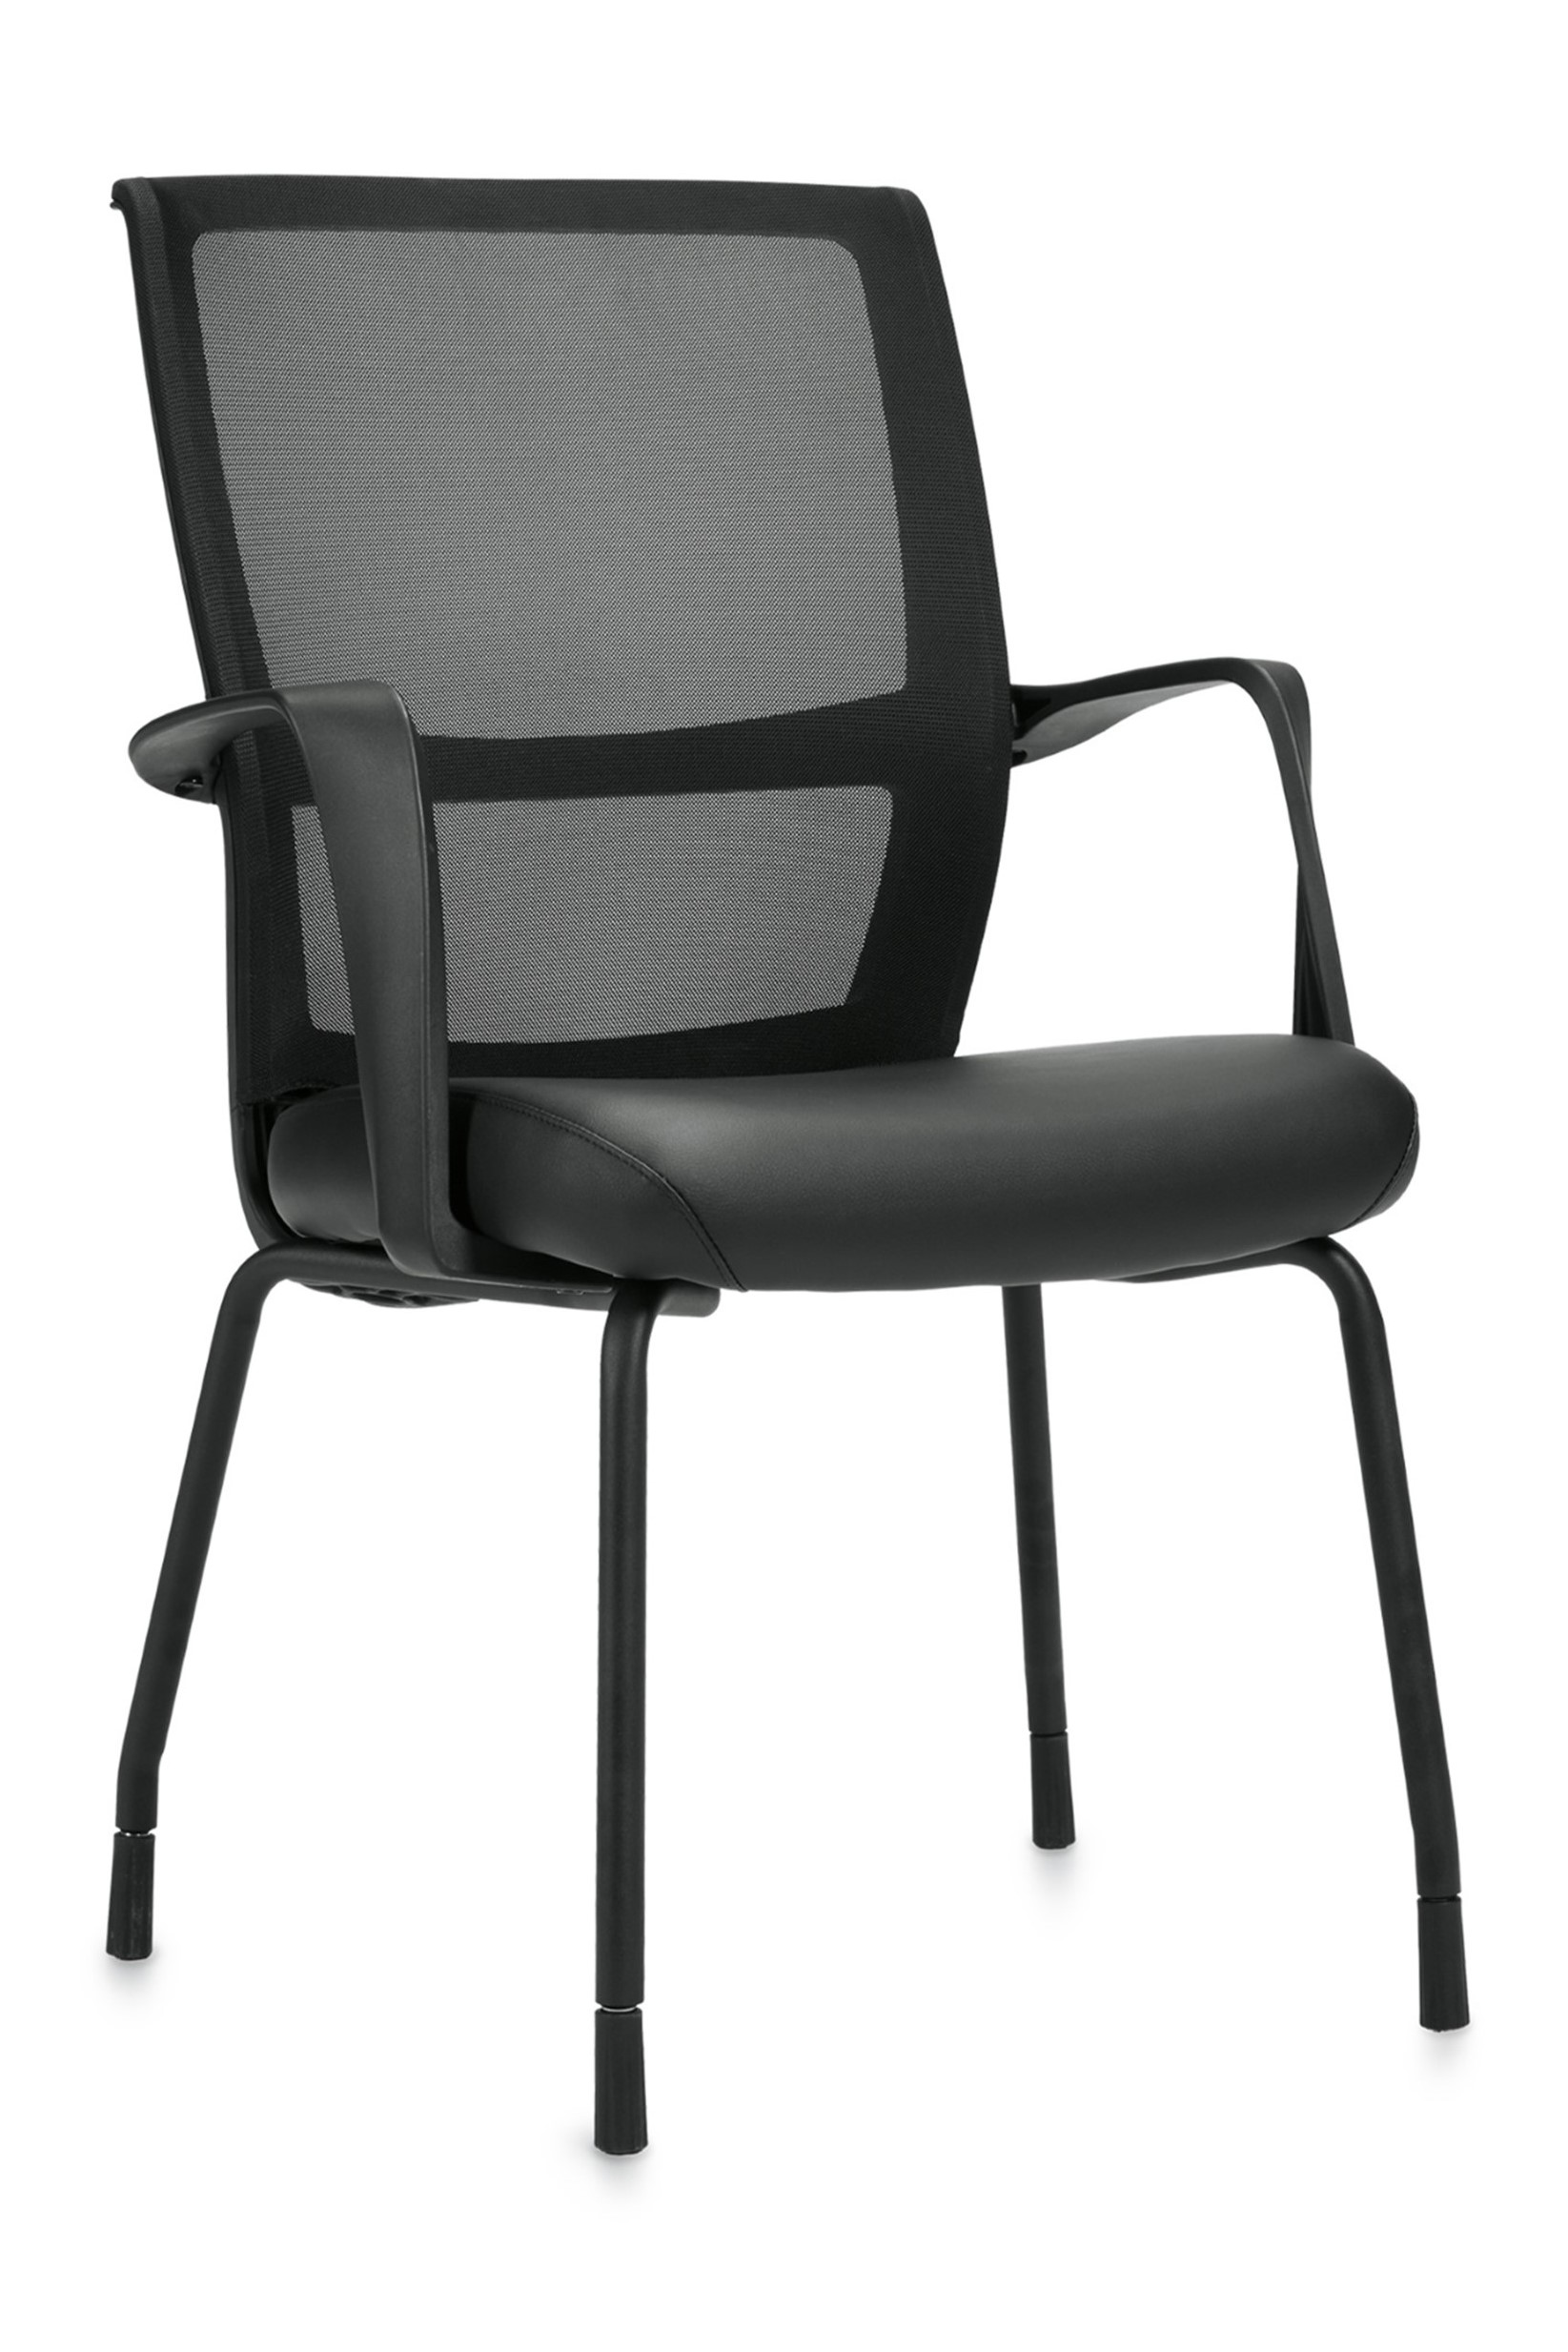 Flared back guest chair with twisted loop arms, black powder-coated tubular steel legs, mesh back, and black Luxhide seat.